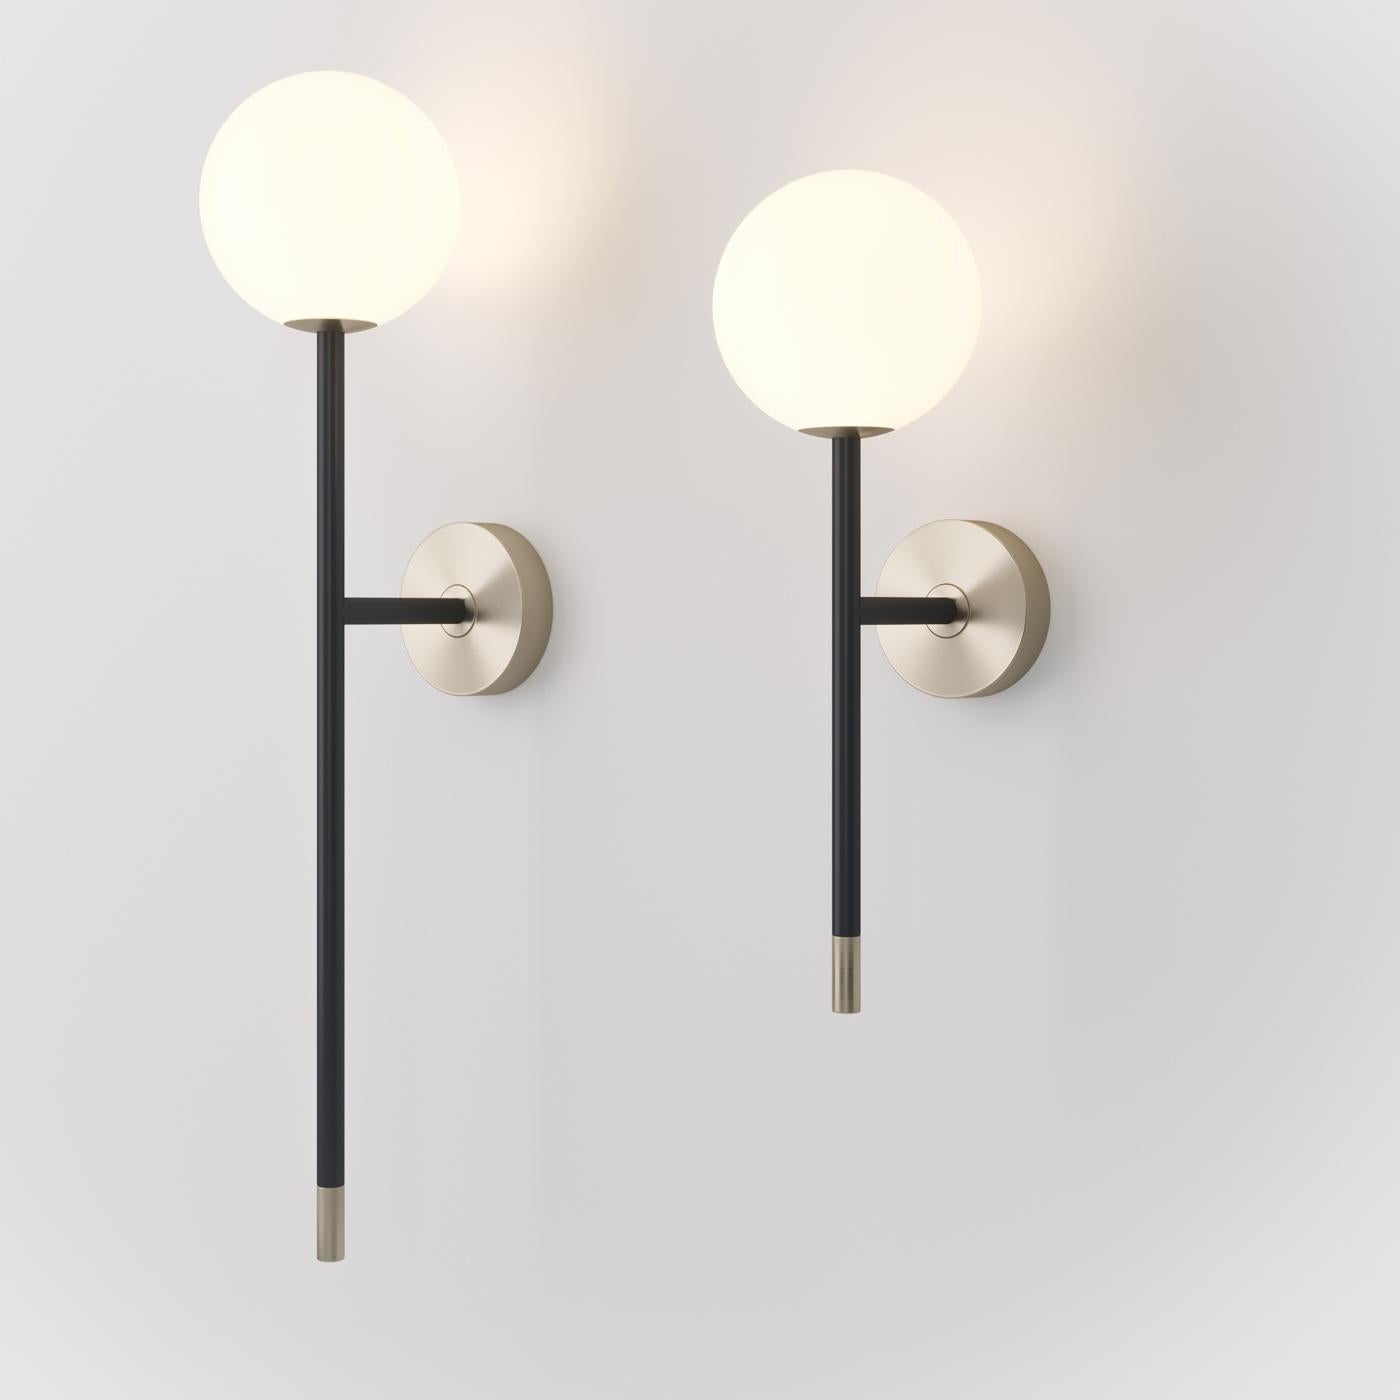 This wall lamp will be an elegant and Minimalist addition to a modern interior, both showcased on its own or with other pieces from the same collection. Its essential lines are composed of a straight and sleek stem fashioned of high-resistant,